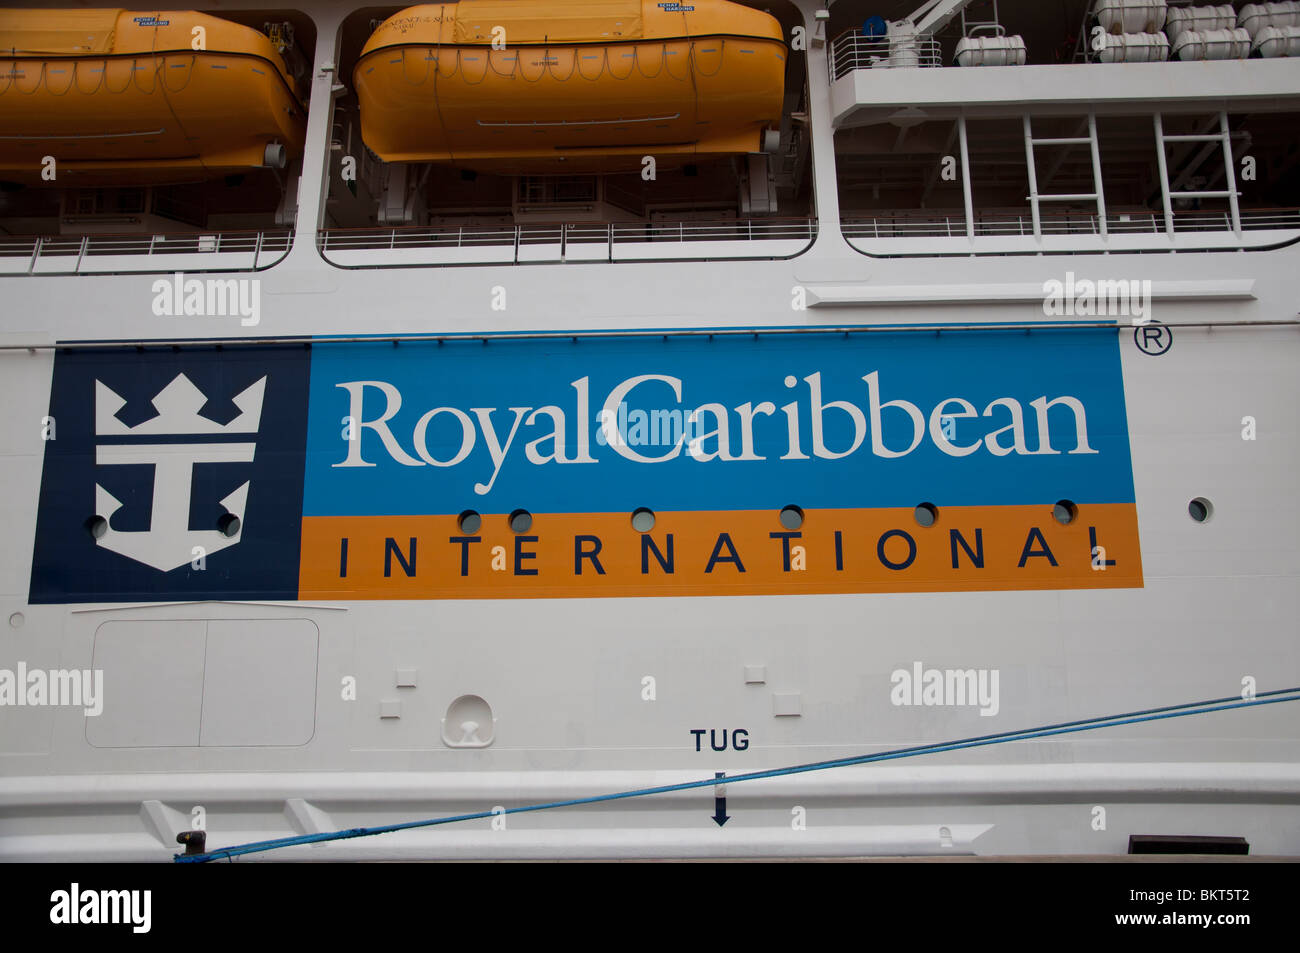 The Royal Caribbean International logo painted on the side of the Independence of the Seas cruise ship. Stock Photo